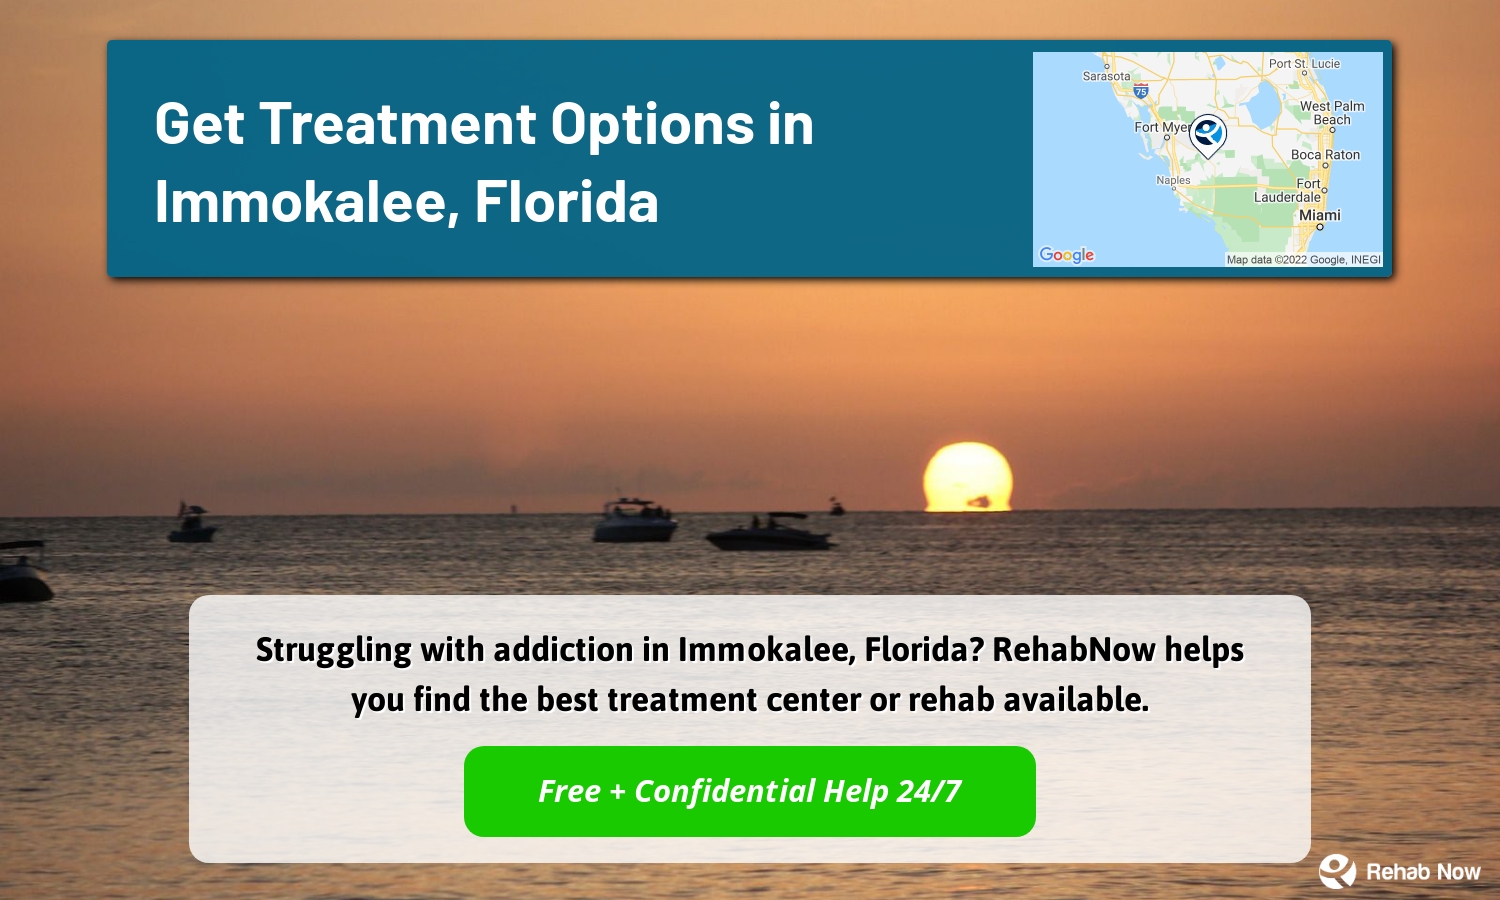 Struggling with addiction in Immokalee, Florida? RehabNow helps you find the best treatment center or rehab available.